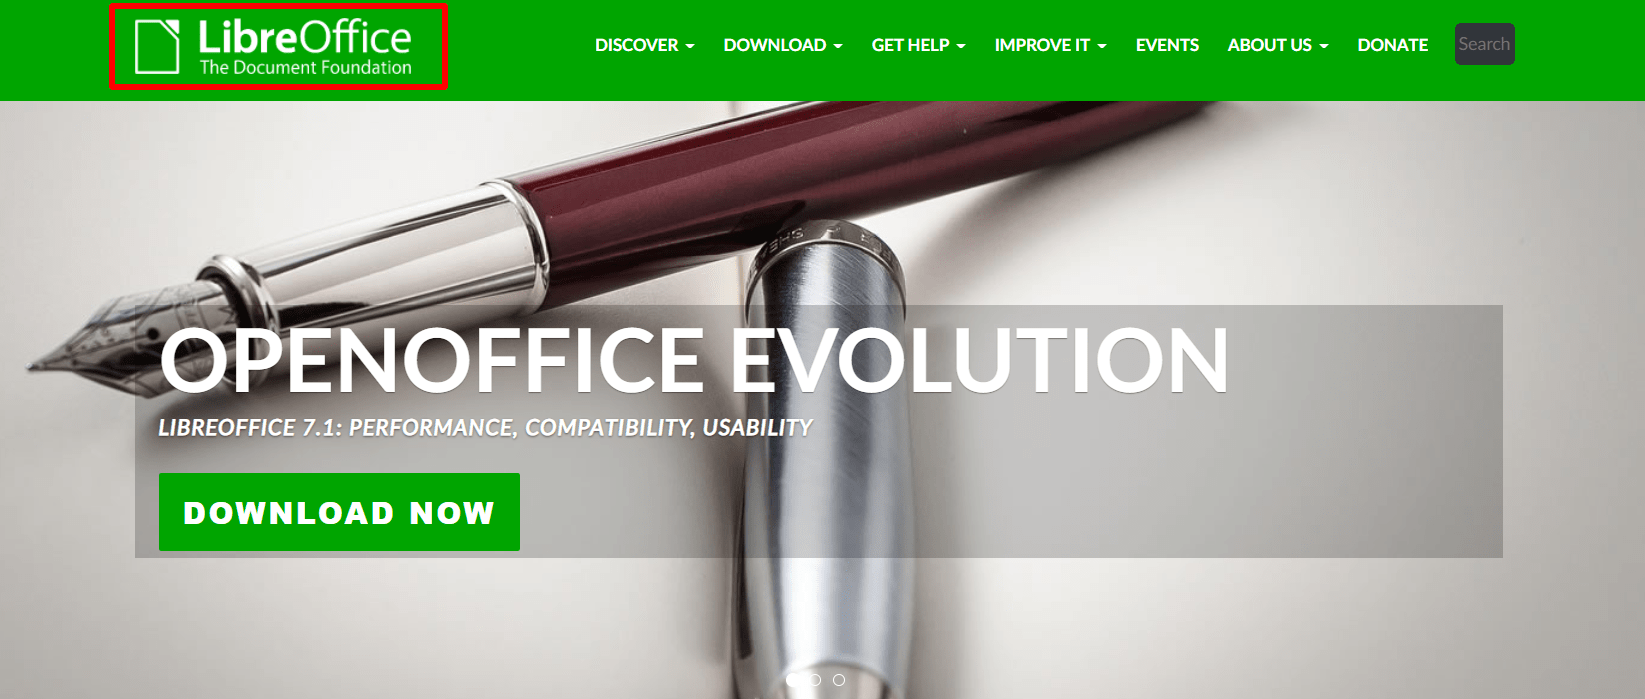 Home-LibreOffice-Free-Office-Suite-Based-on-OpenOffice-Compatible-with-Microsoft